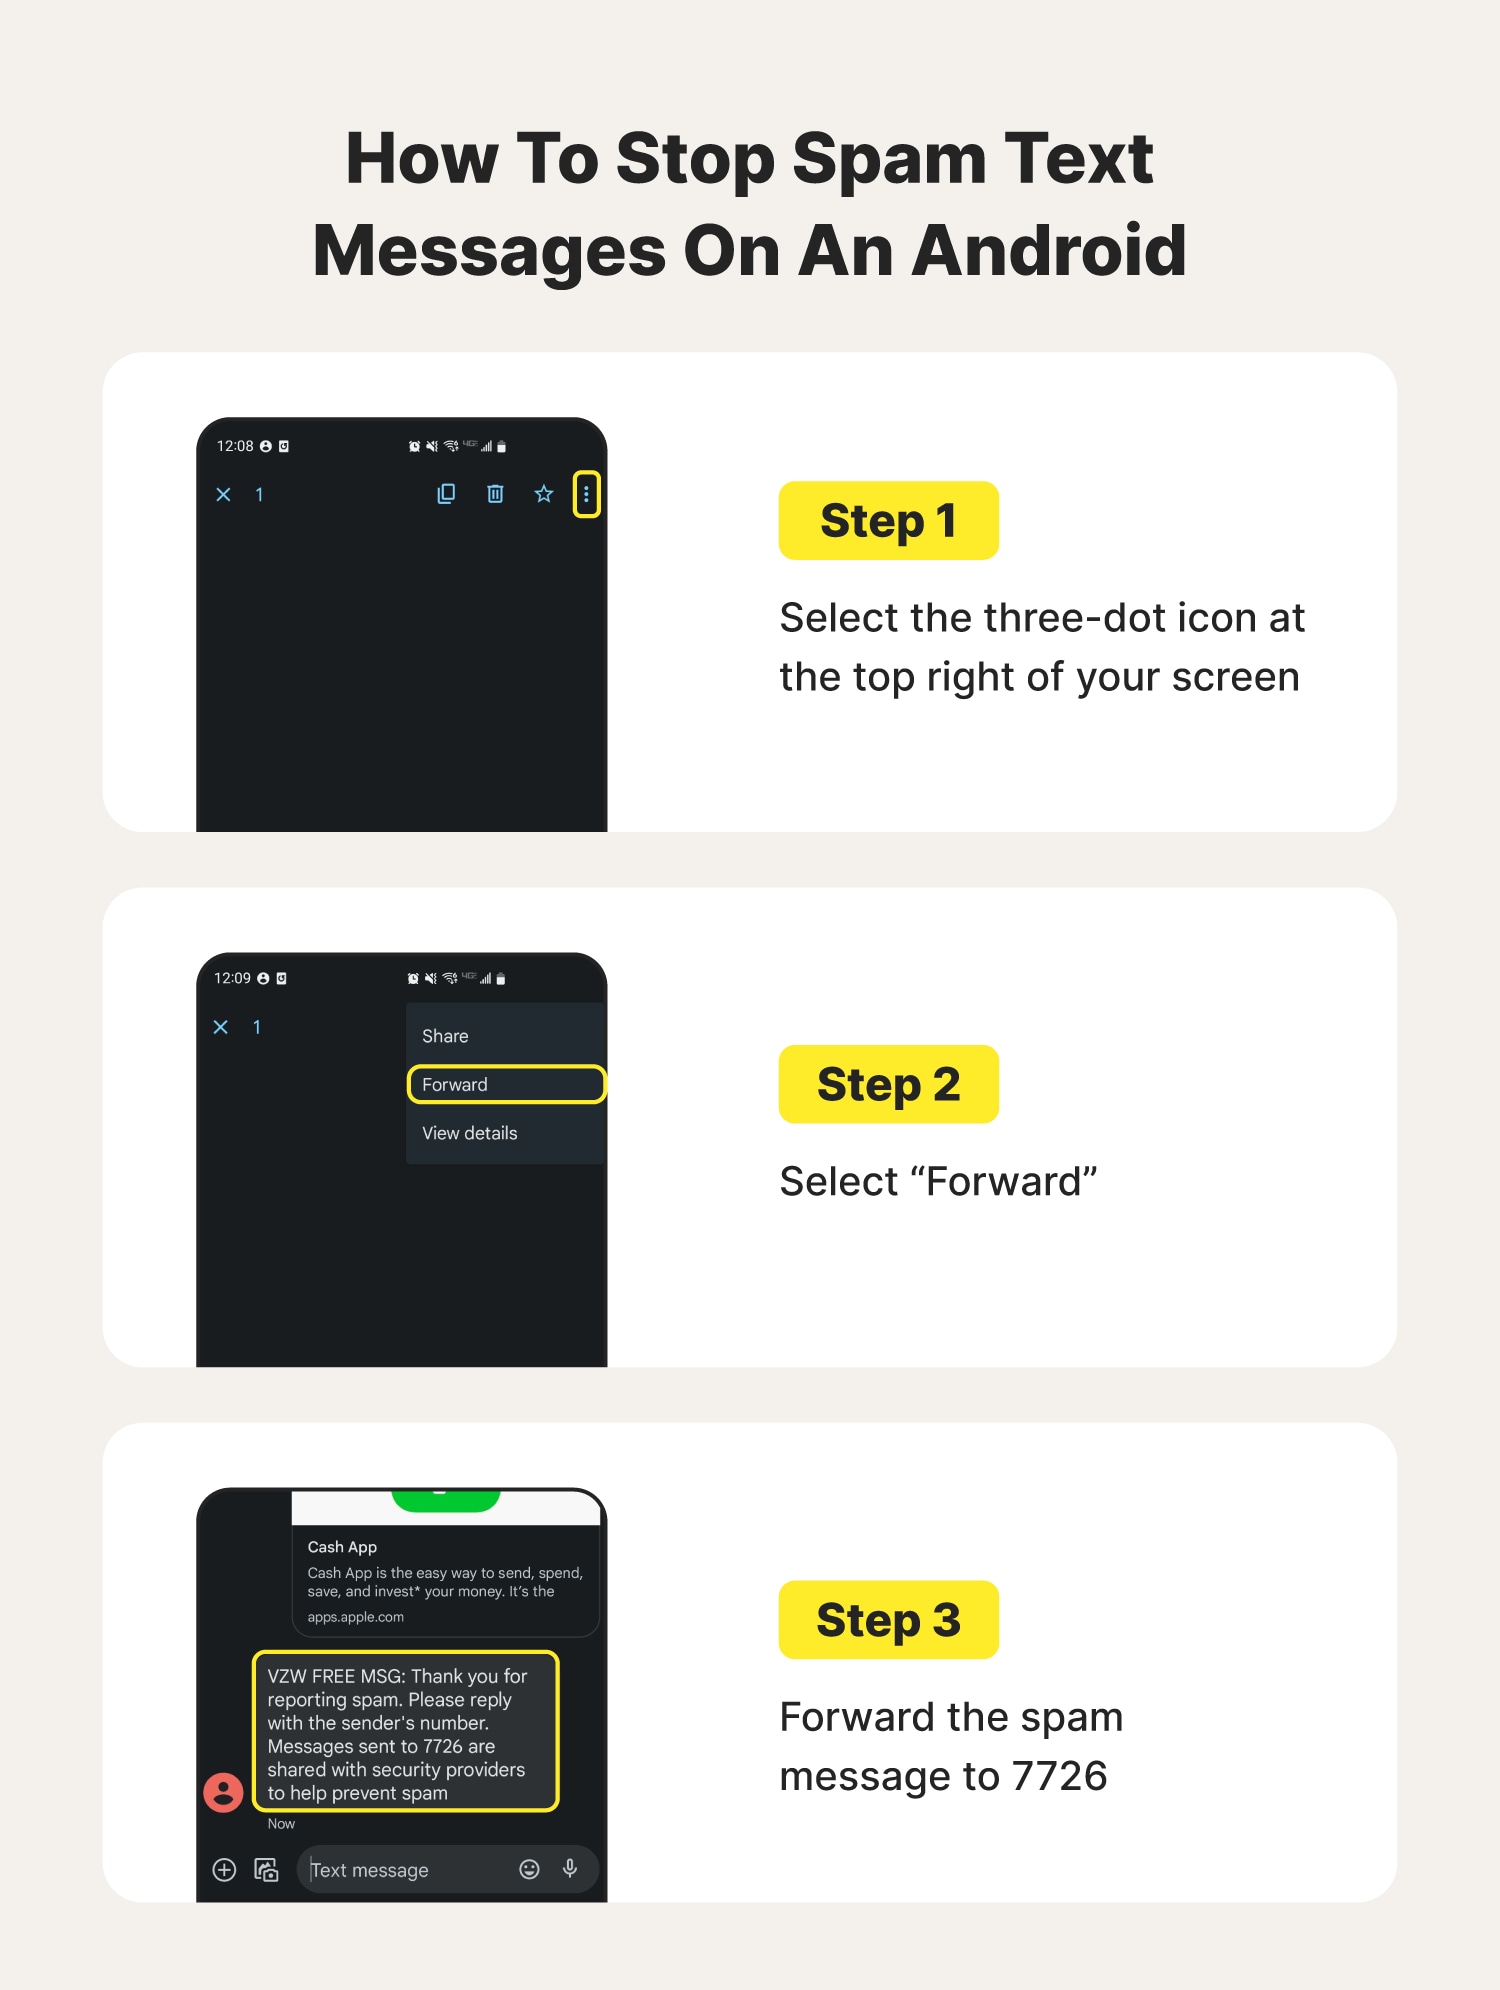 A graphic details how to stop spam texts on an Android by listing out how to report suspicious messages to 7726.